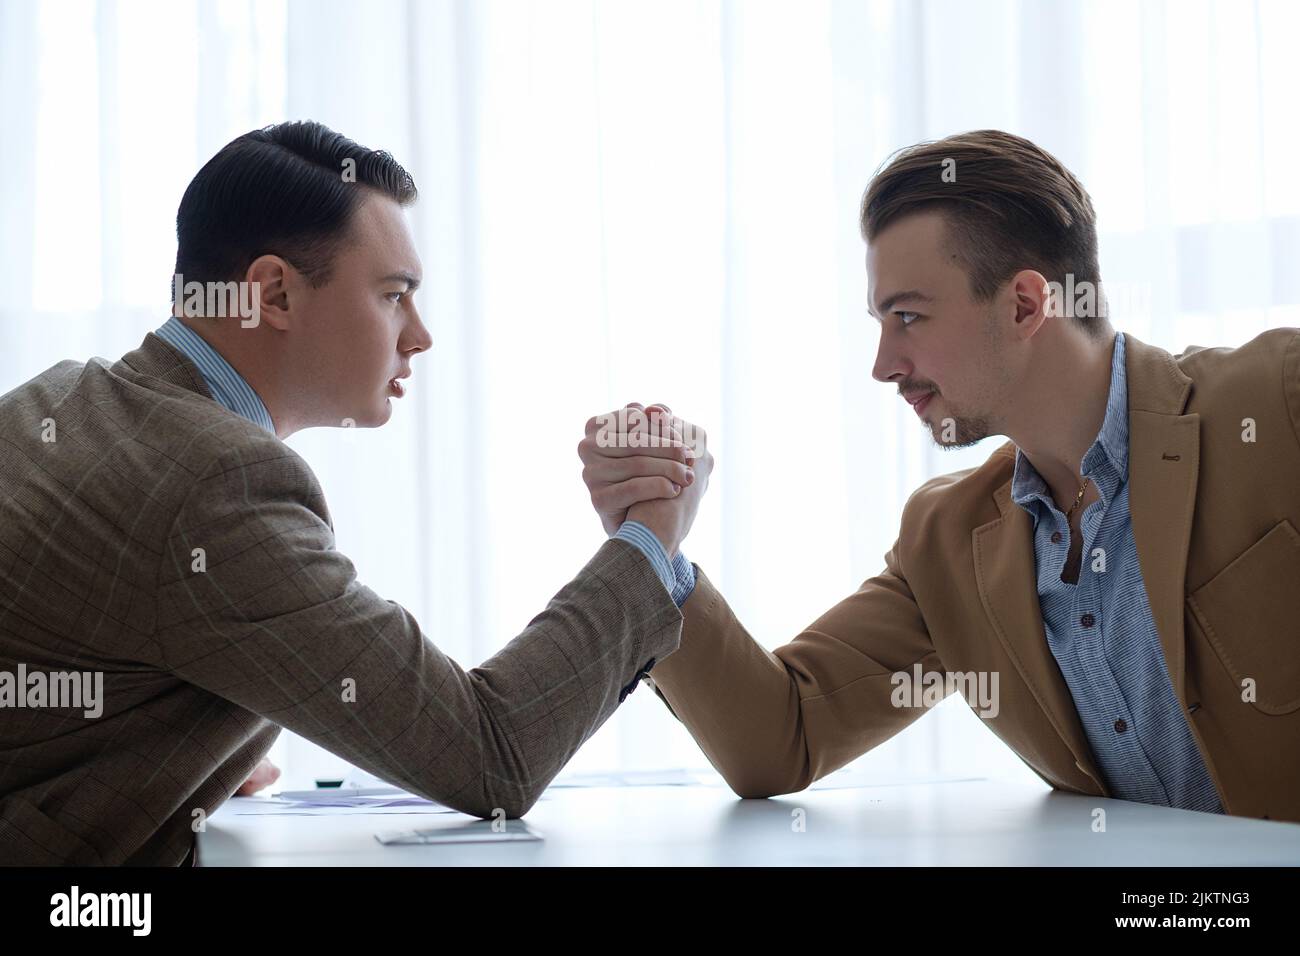 Business Face off Arm Wrestling Leader Wettbewerb Stockfoto